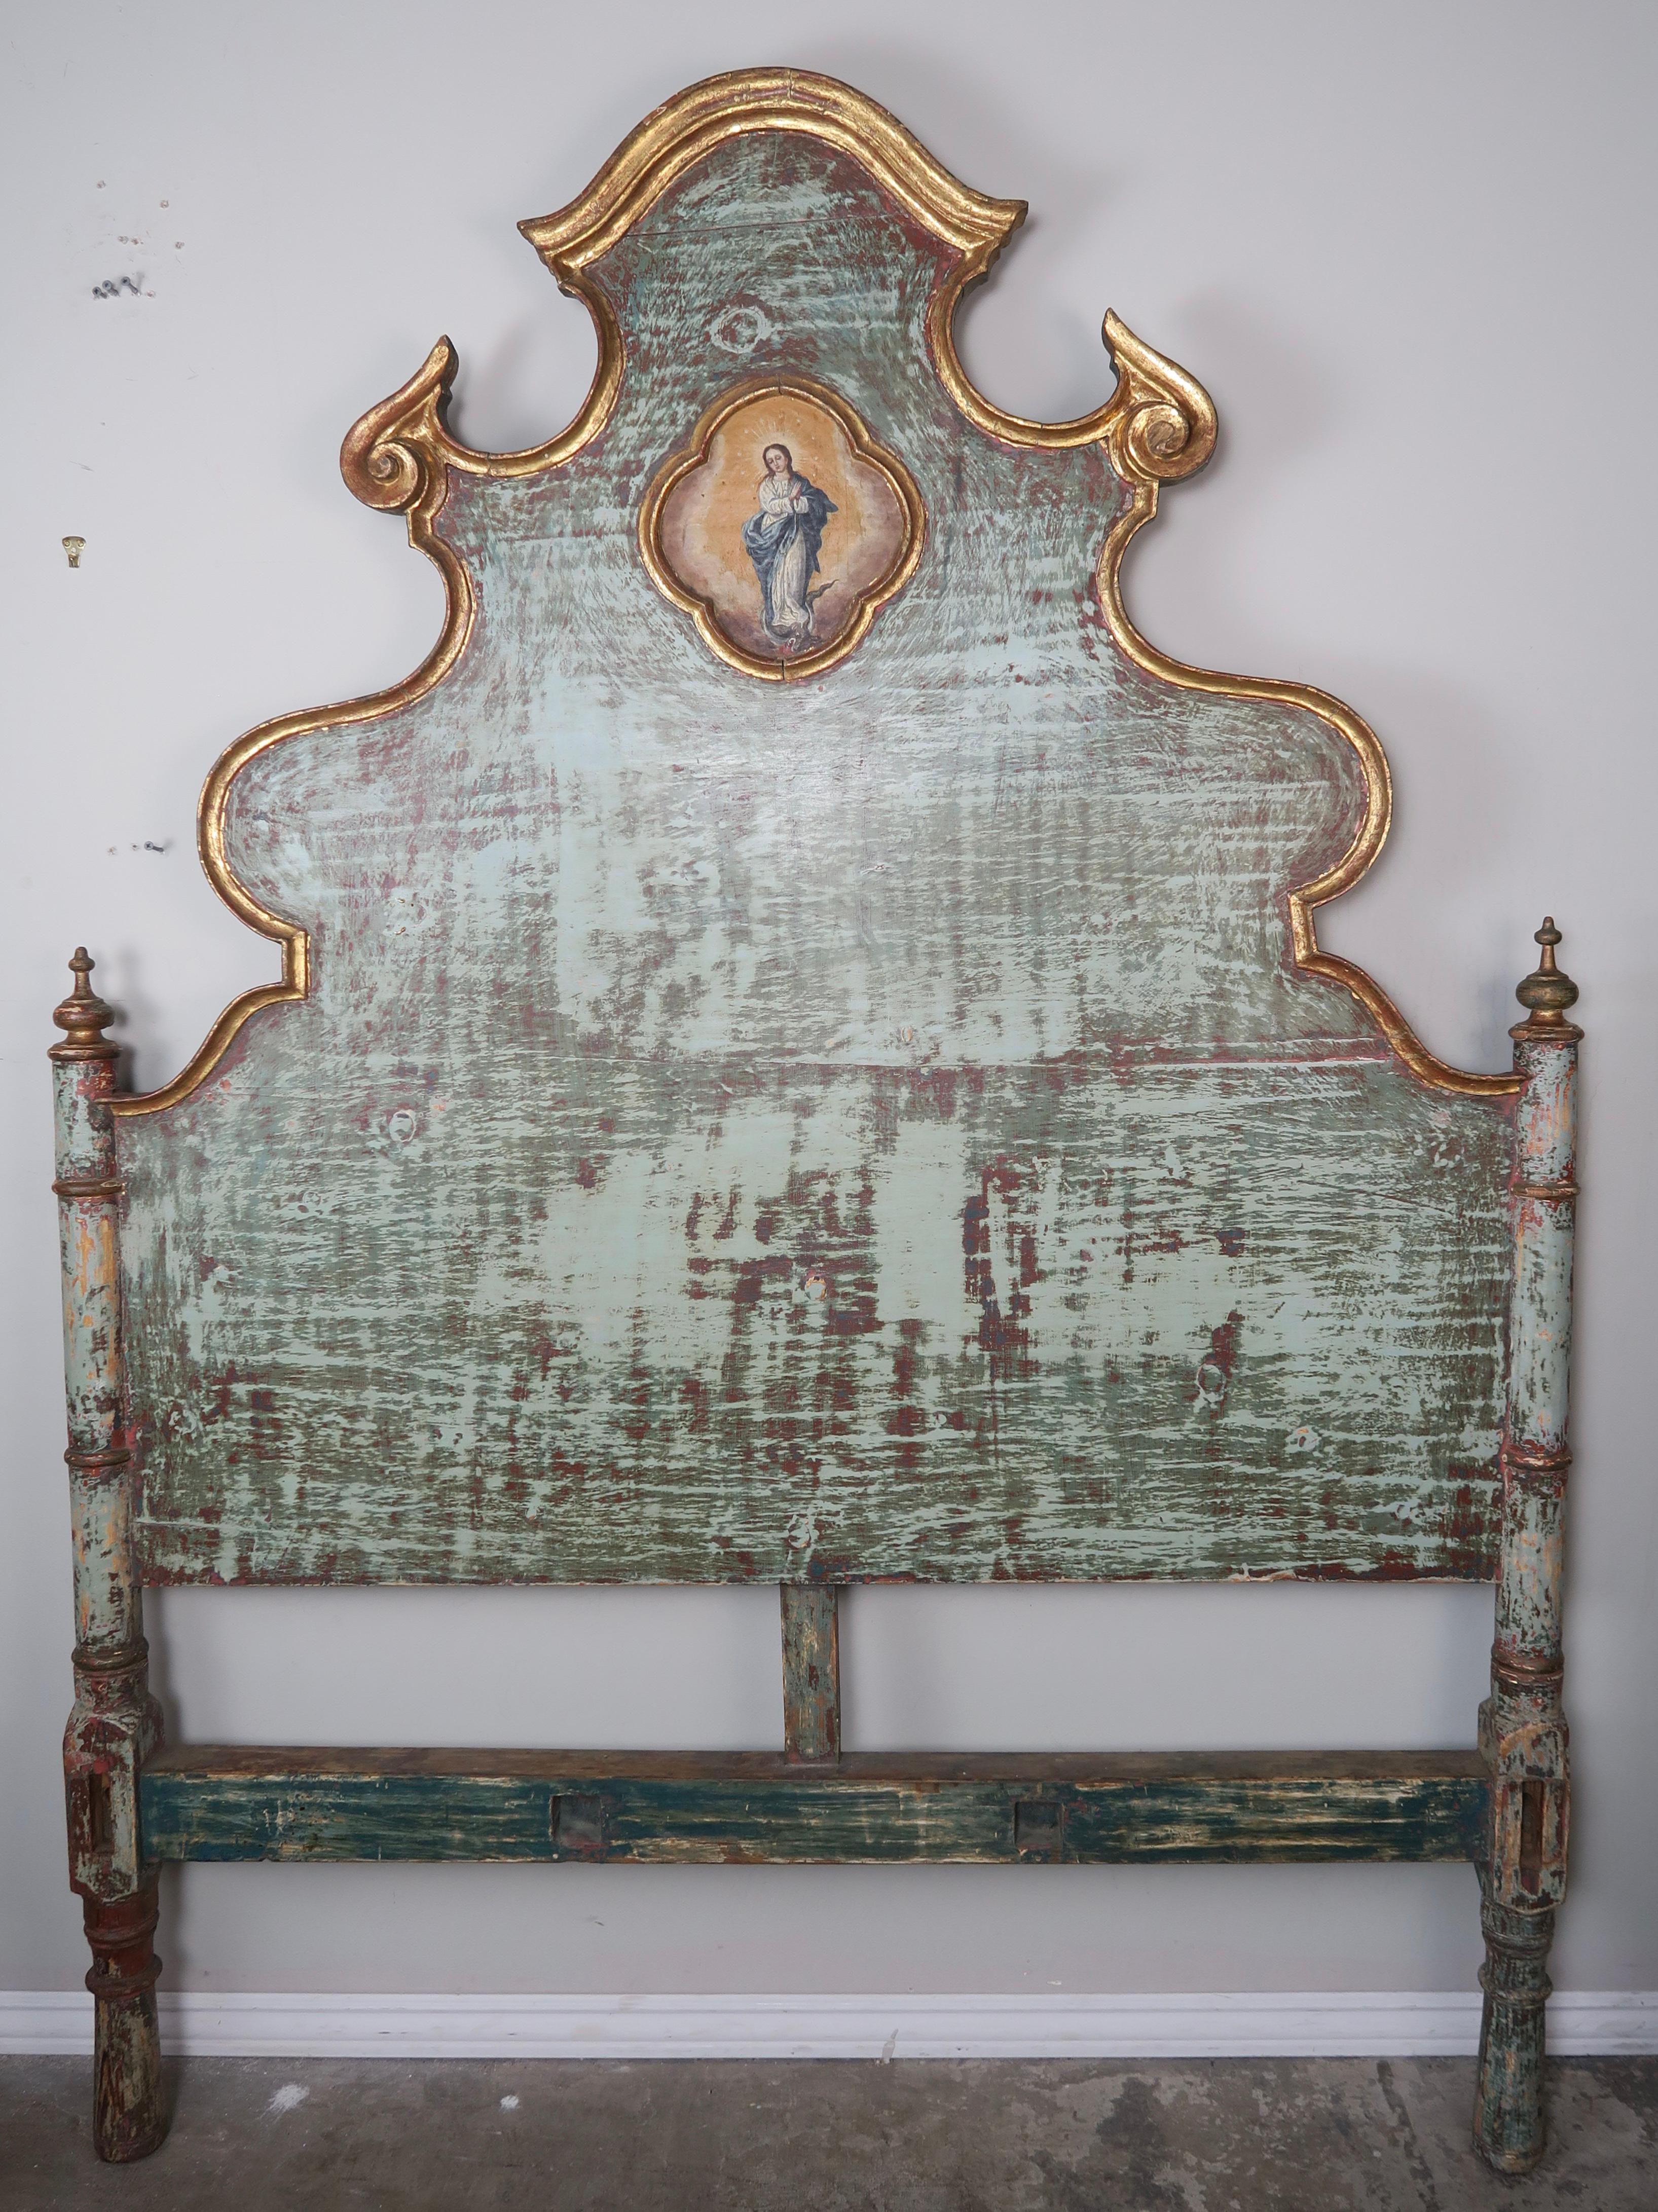 19th century Spanish painted headboard with 22-karat gold leaf detailing on the beautifully scalloped shaped frame A center cartouche depicts a fine painting of the Virgin Mary. Worn green painted finish with soft shades of aqua underneath. Absolute